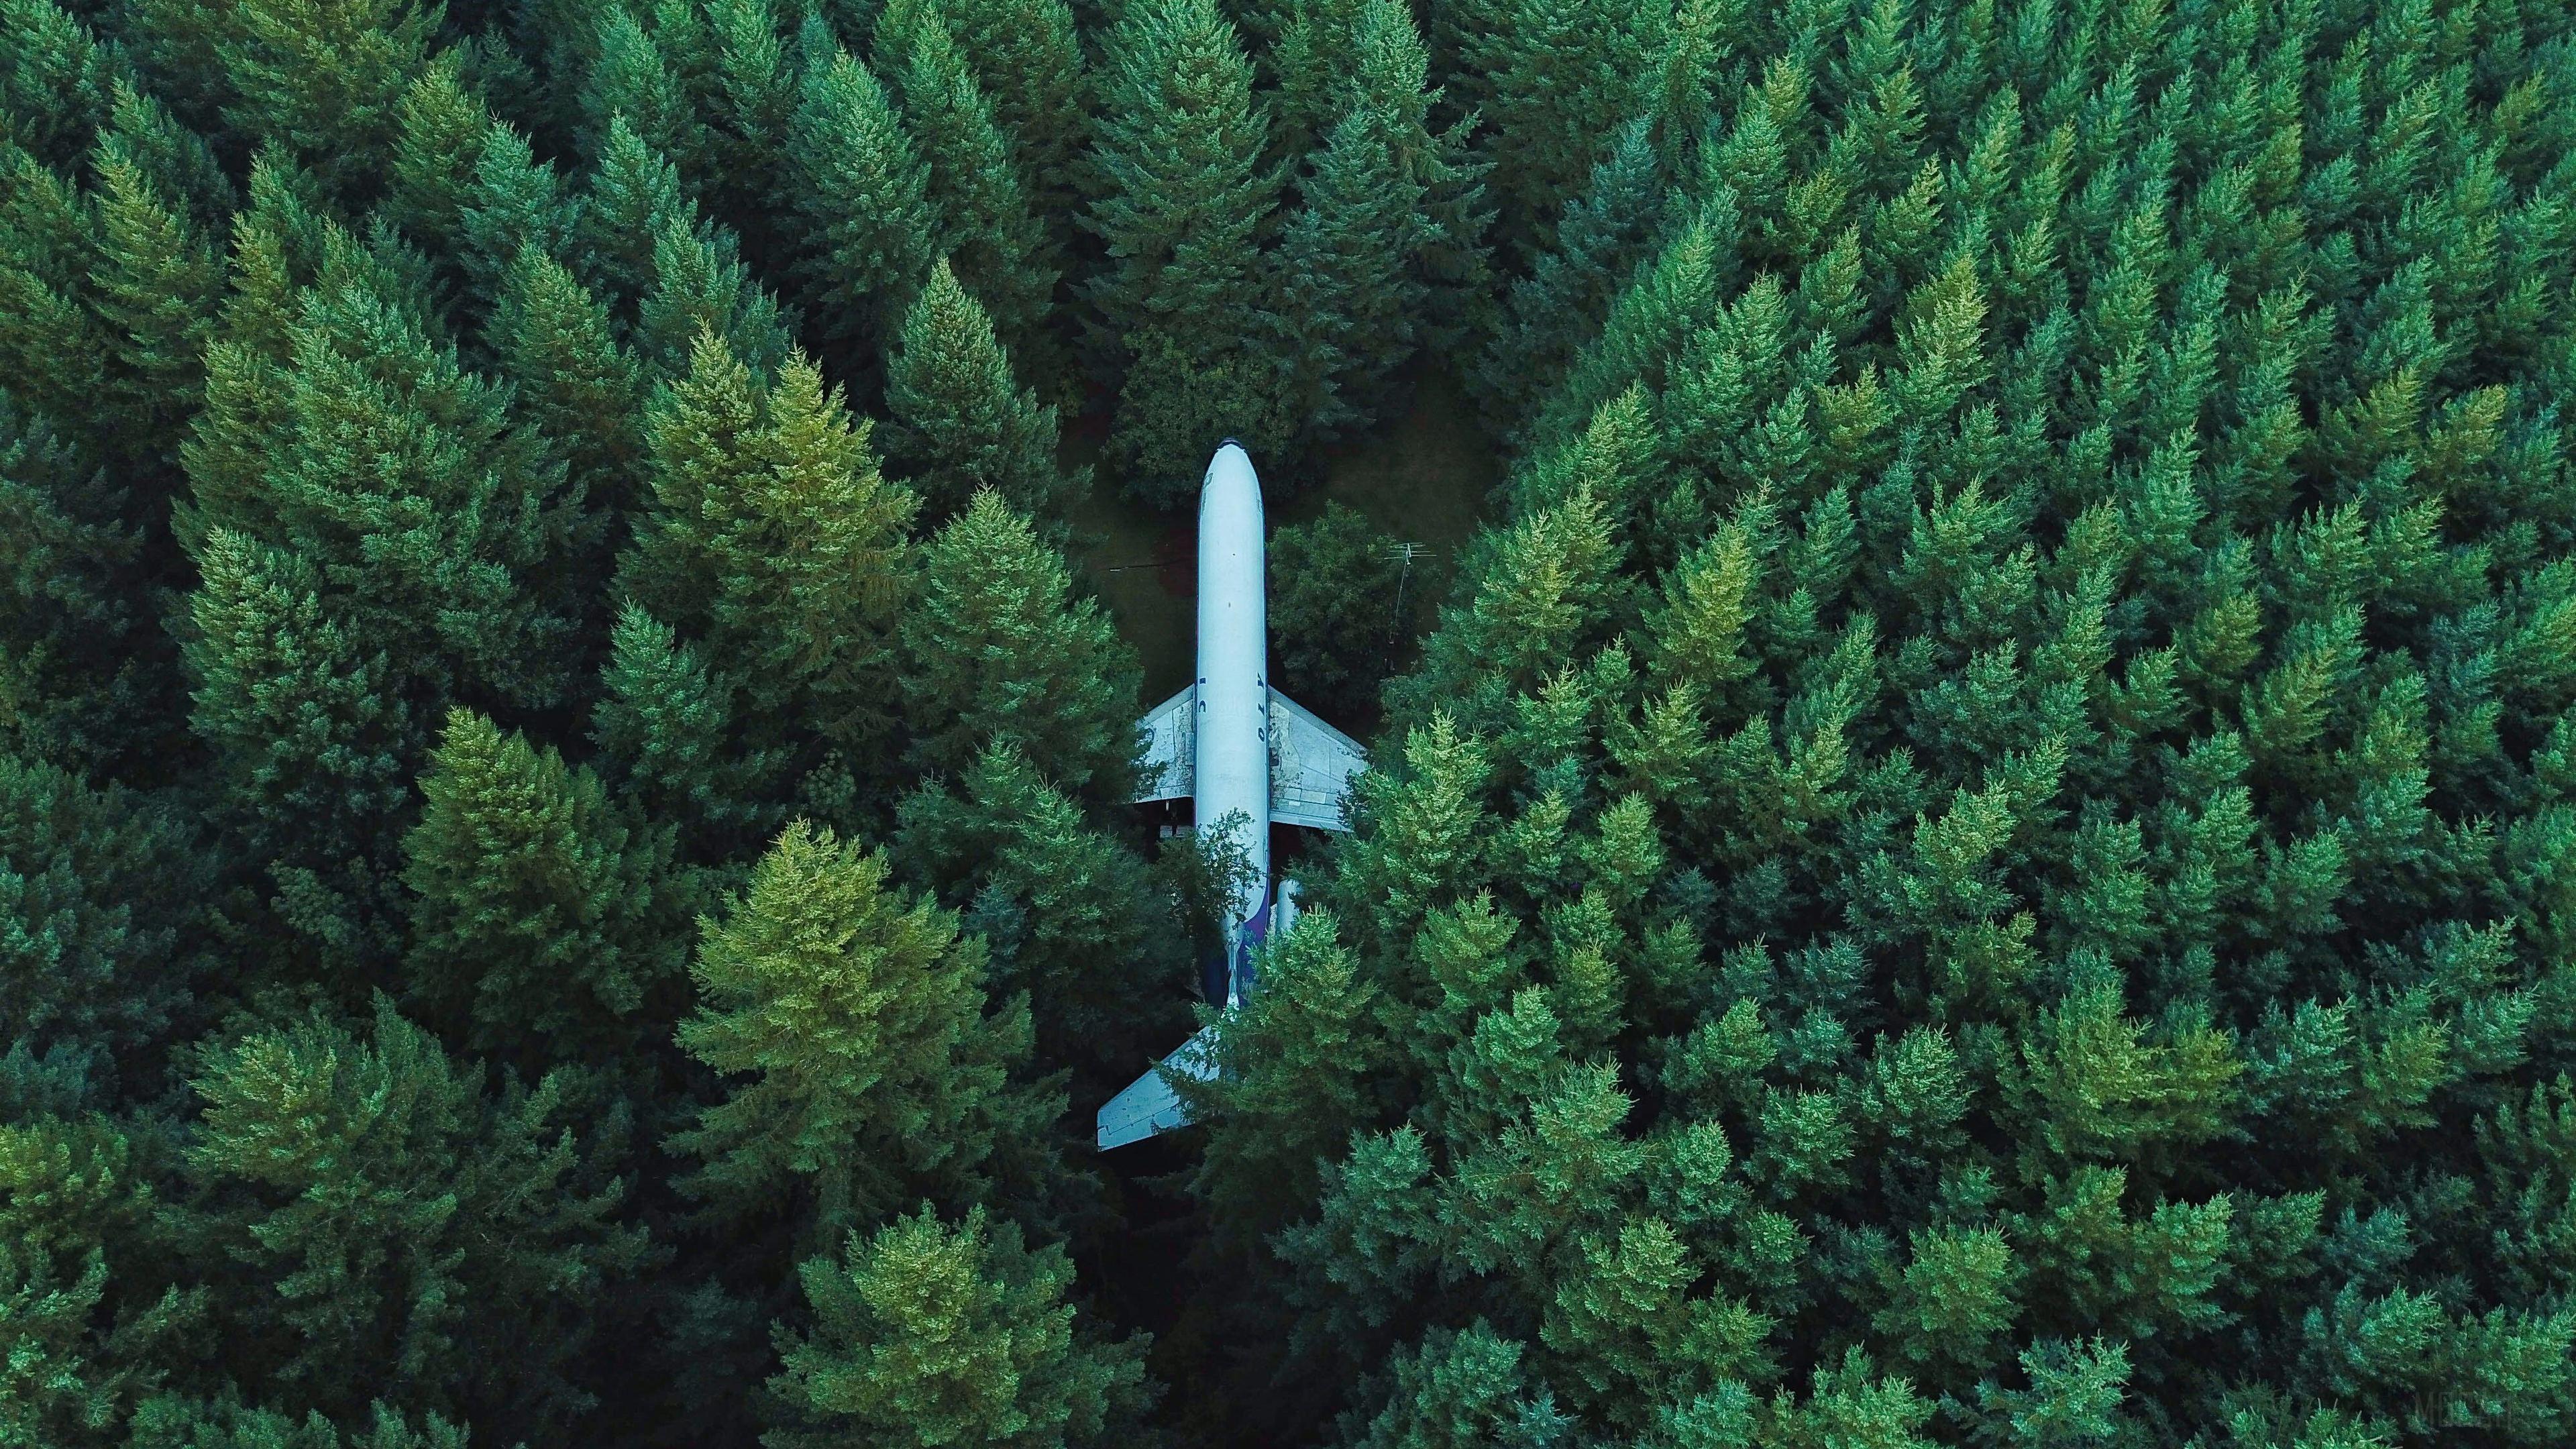 HD wallpaper, Plane In Middle Of Forest 4K